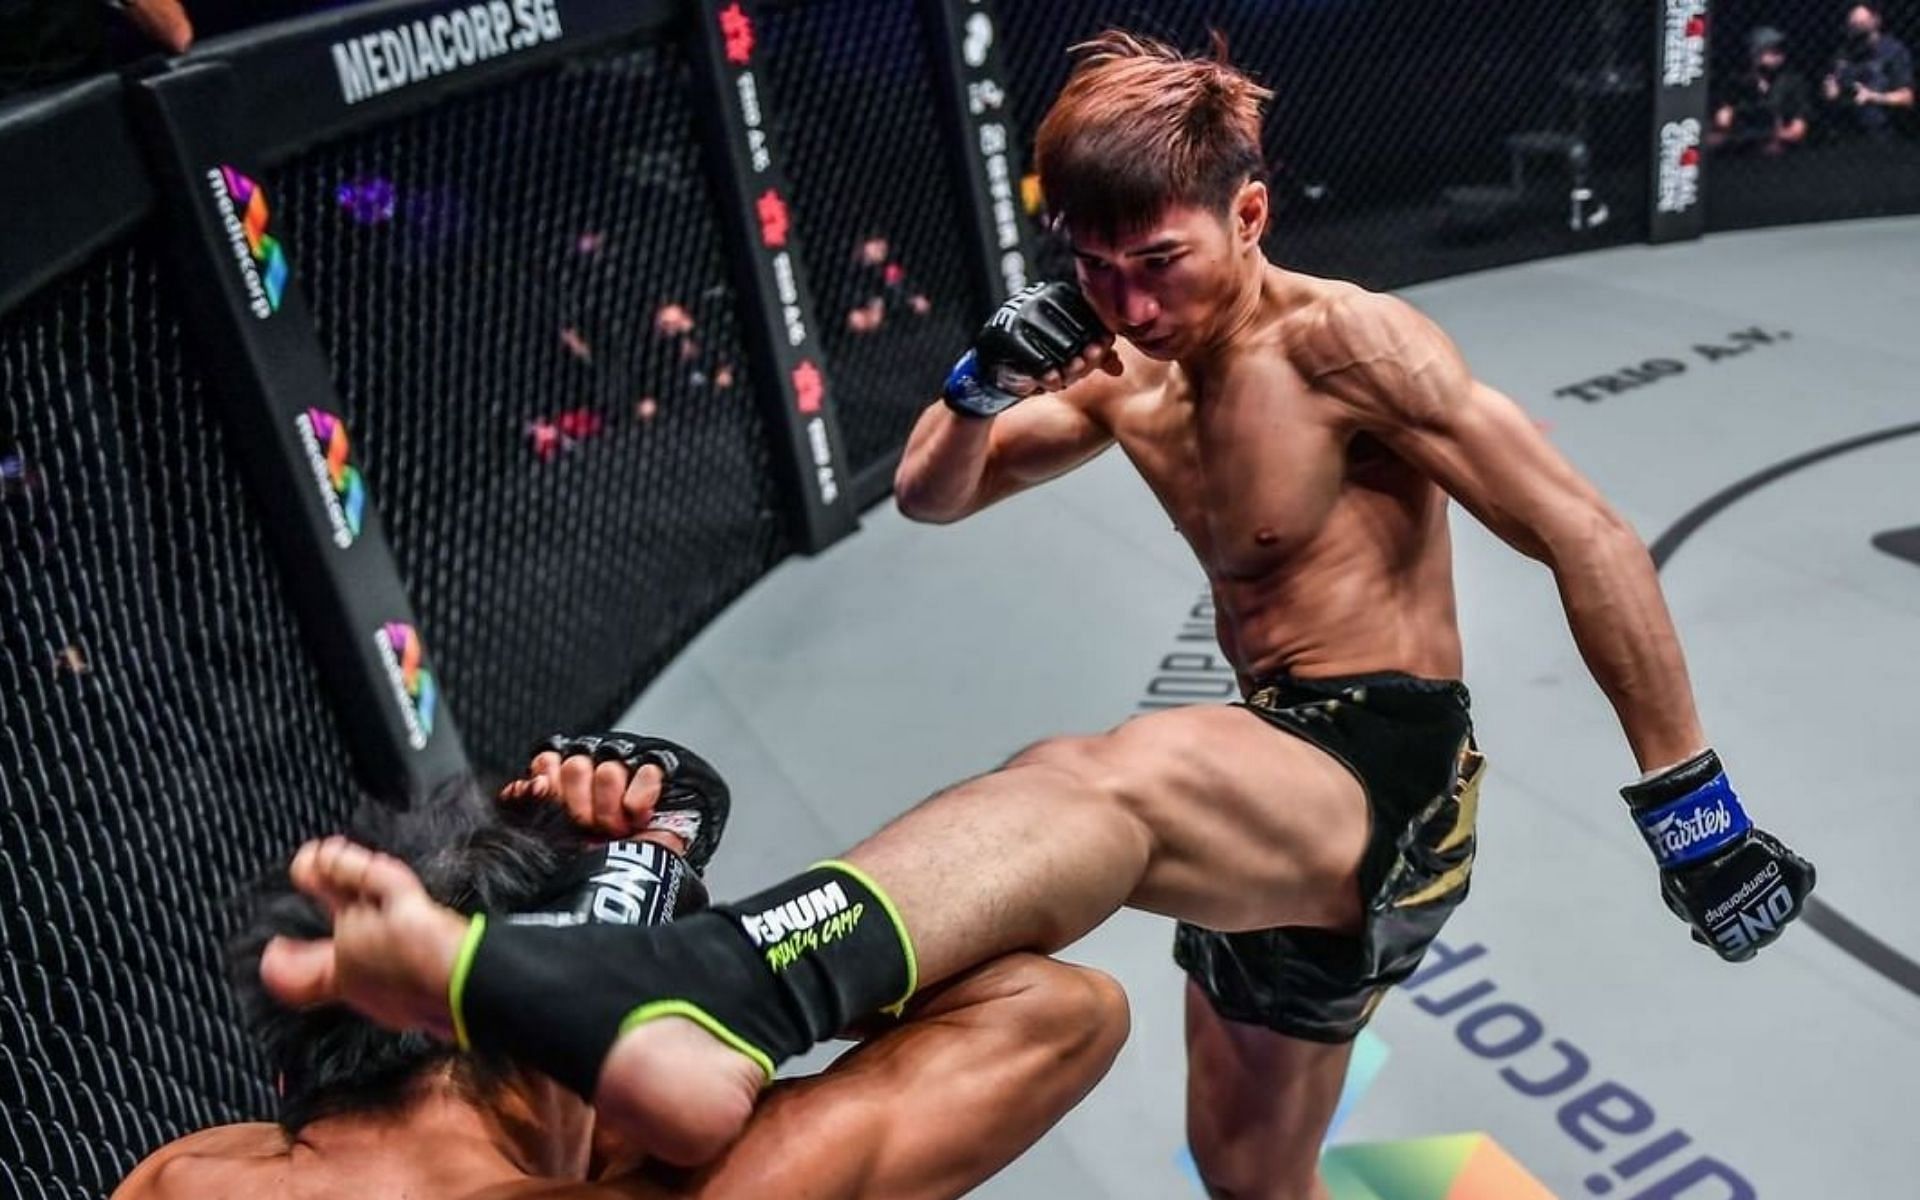 ONE Championship rising star Tawanchai eyes featherweight gold after knocking out good friend Saemapetch. [Photo: @tawanchay_pk on Instagram]